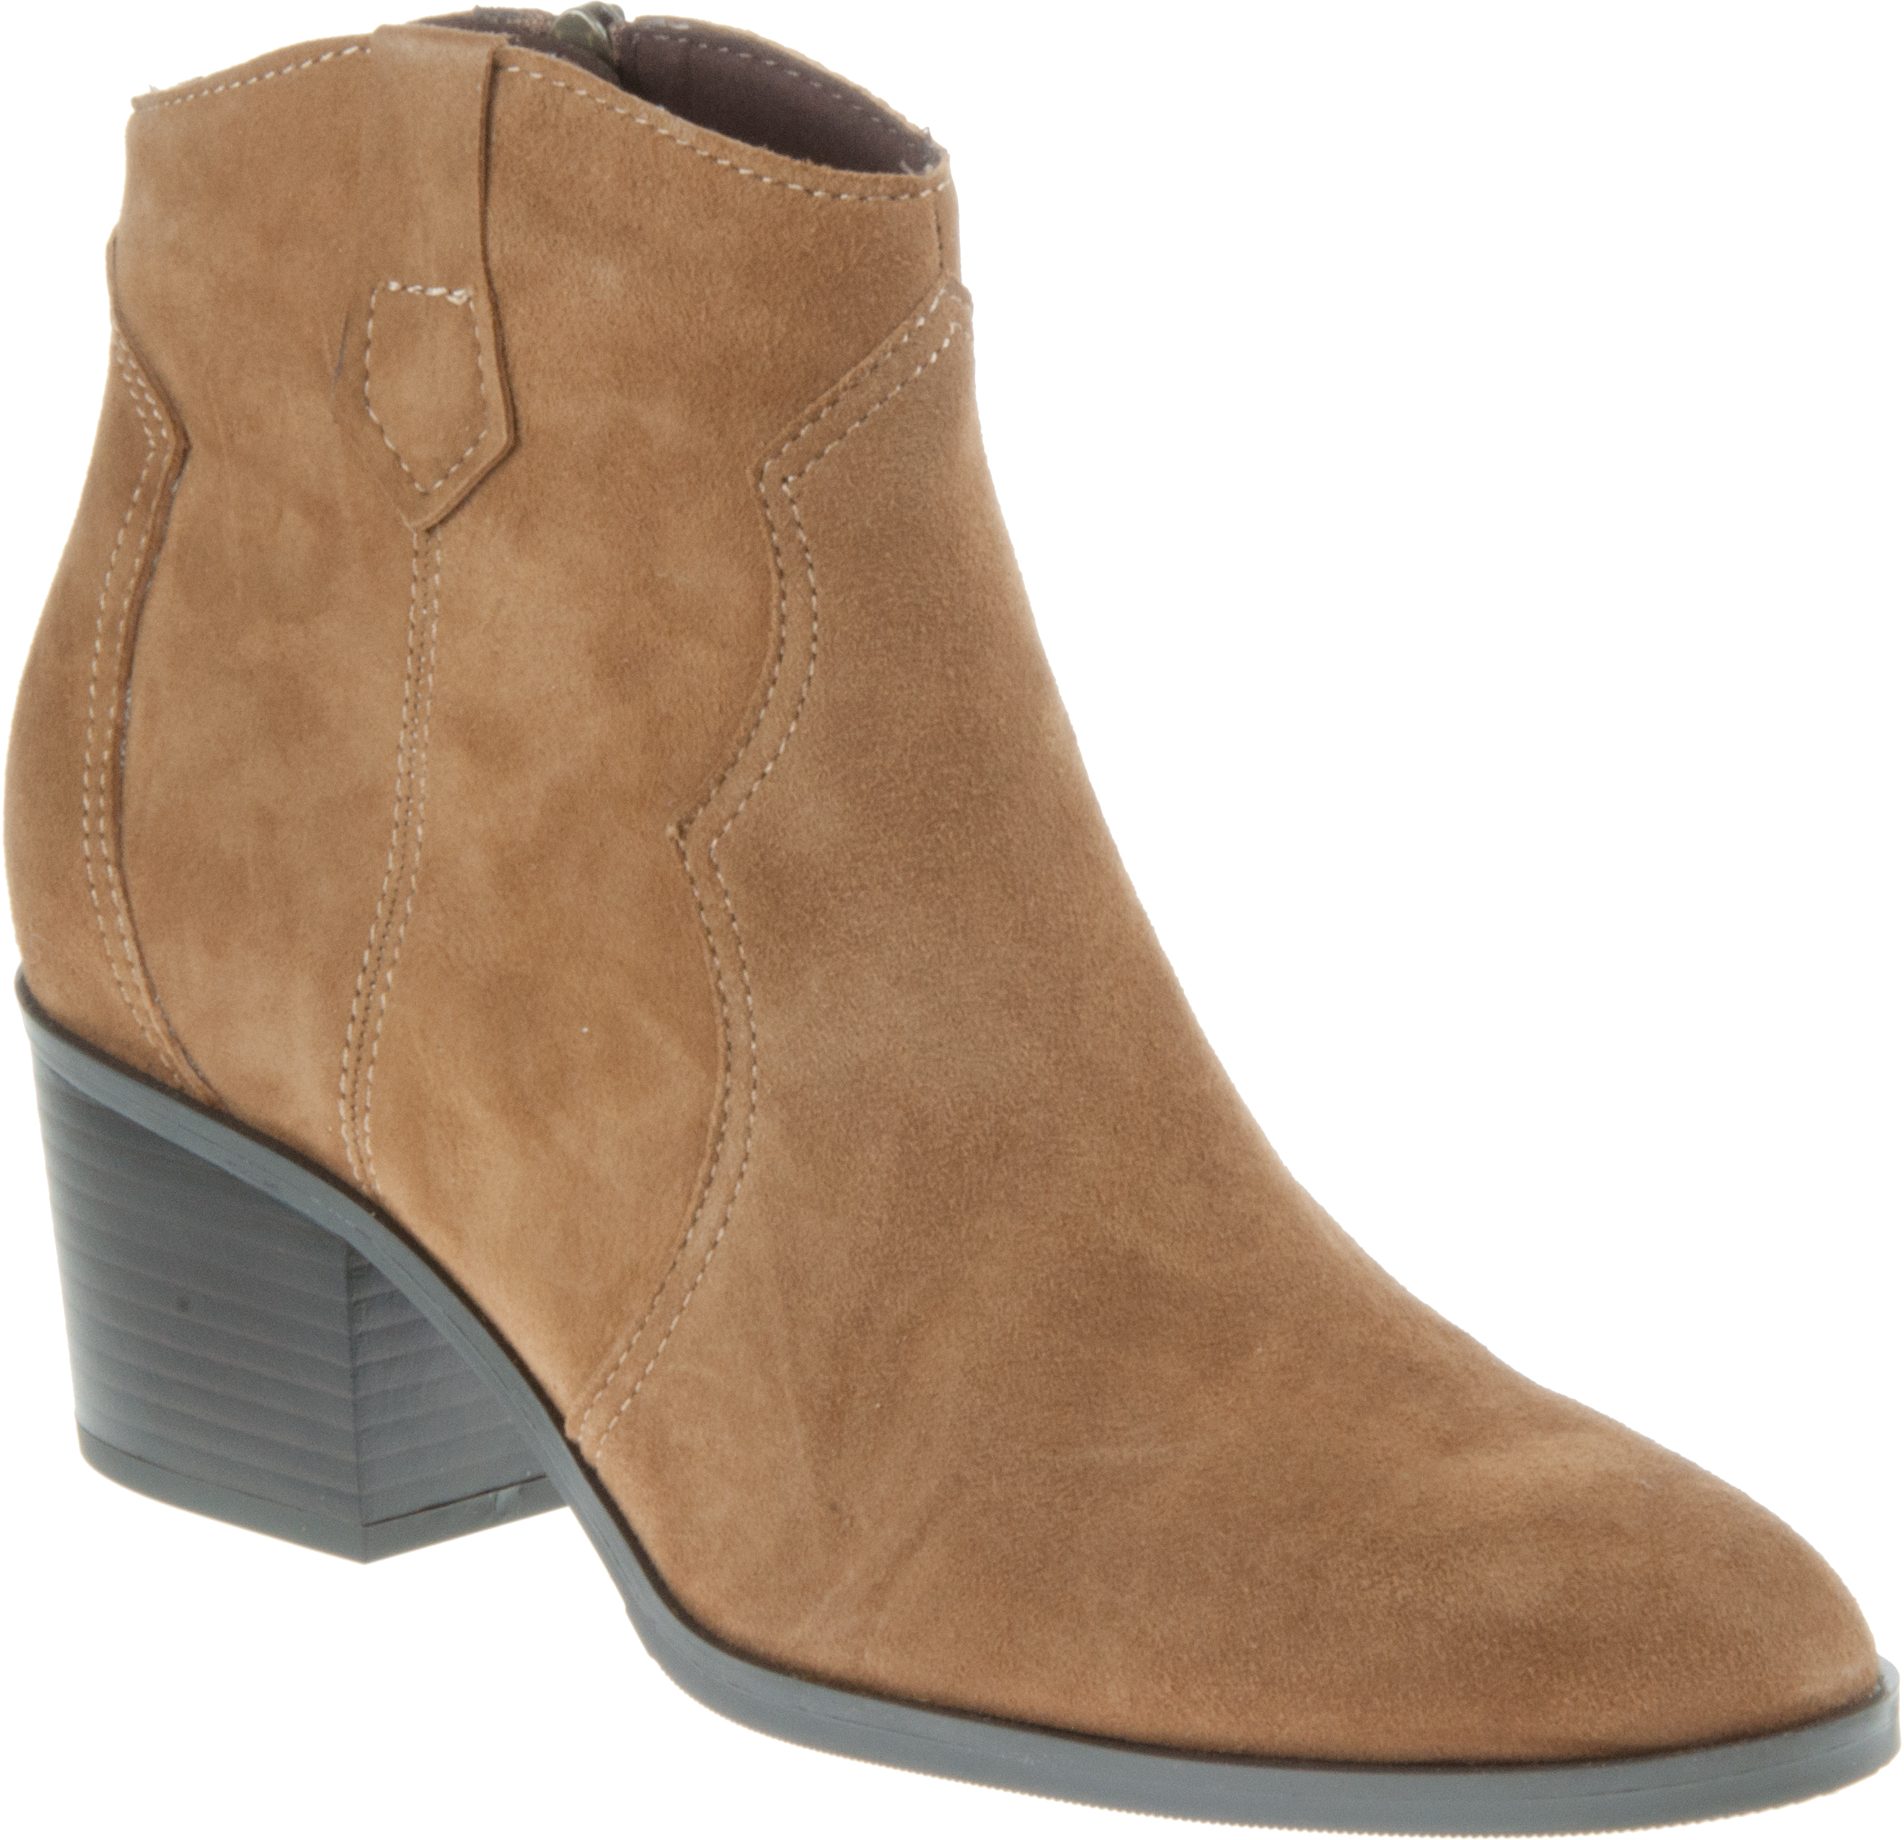 Caprice 25701-25 Mud Suede 25701-25 377 - Ankle Boots - Humphries Shoes